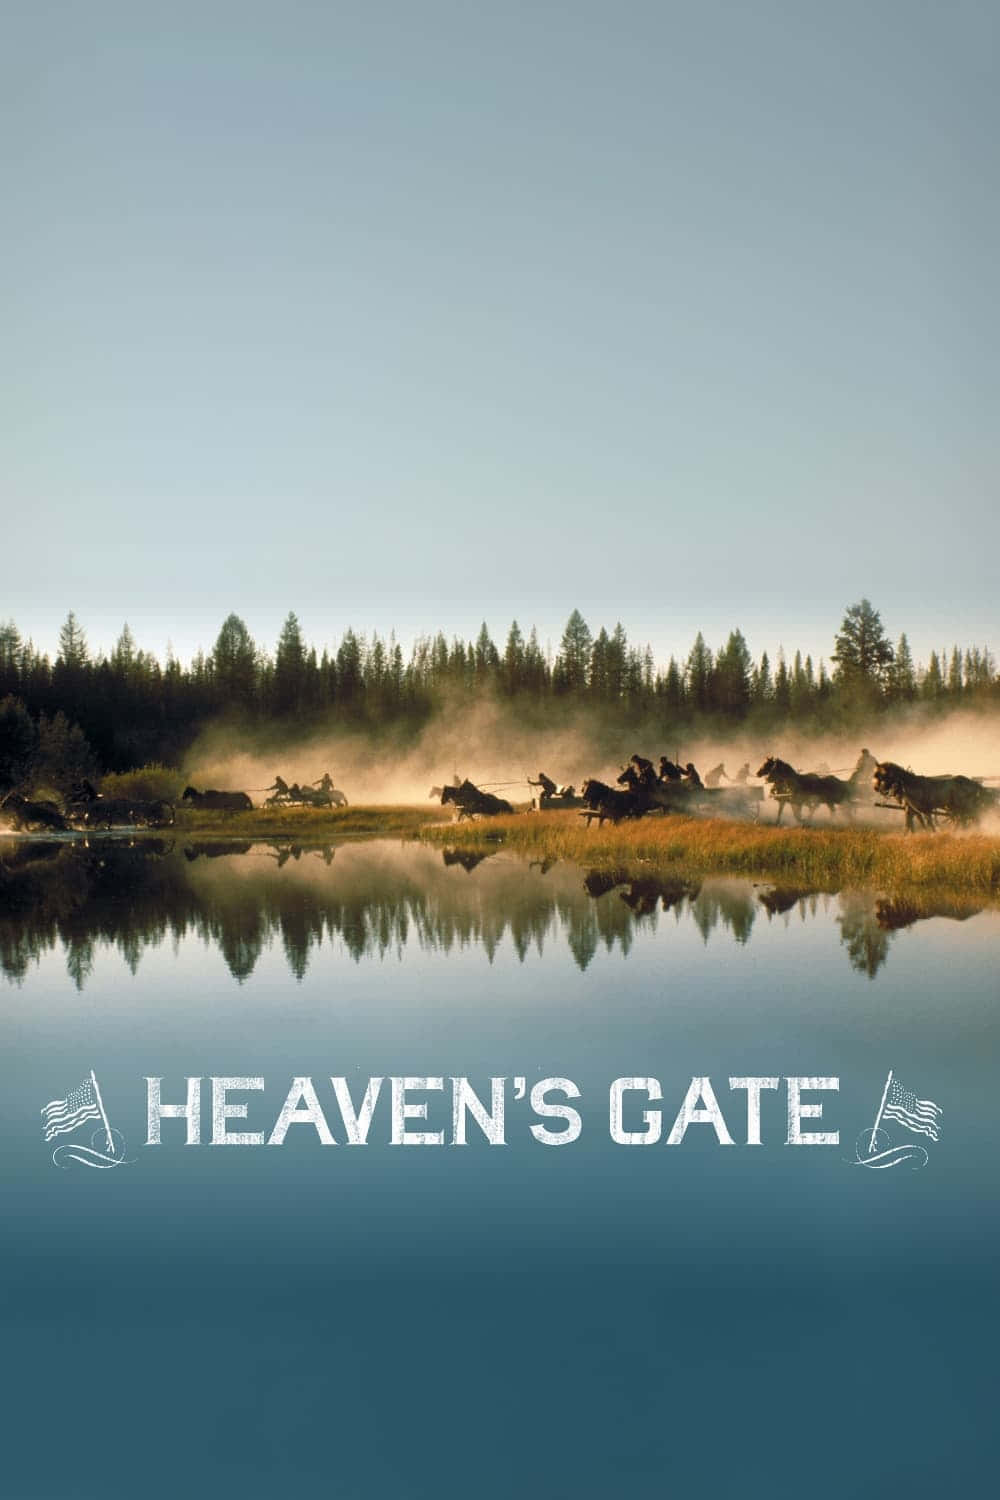 A View of Heaven's Gate